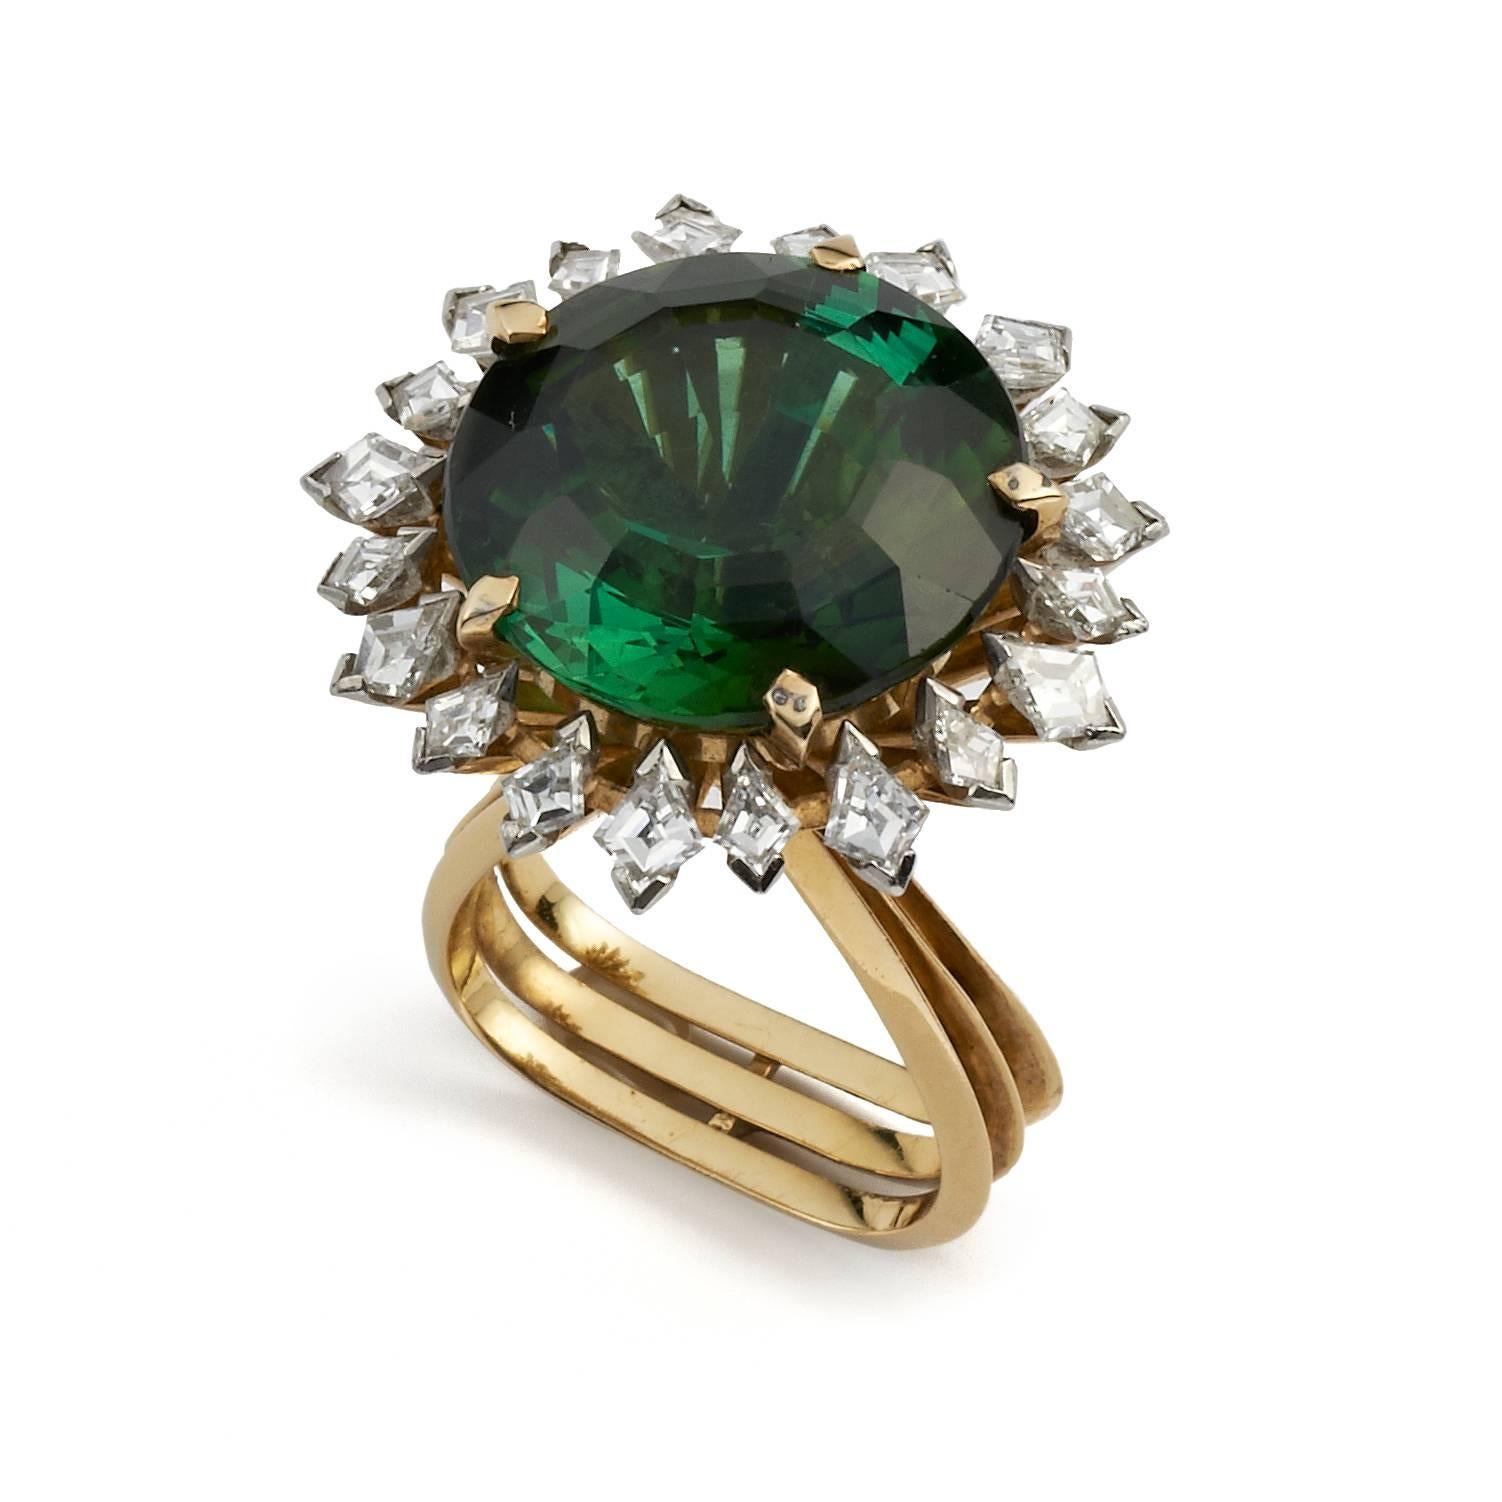 Designed by Andrew Grima in 1974
A superb and rare circular green tourmaline (23cts) is skillfully held by twenty kite-shaped diamonds of varying sizes in platinum. The diamonds in collets are mounted on stalks of yellow gold. Signed GRIMA, London